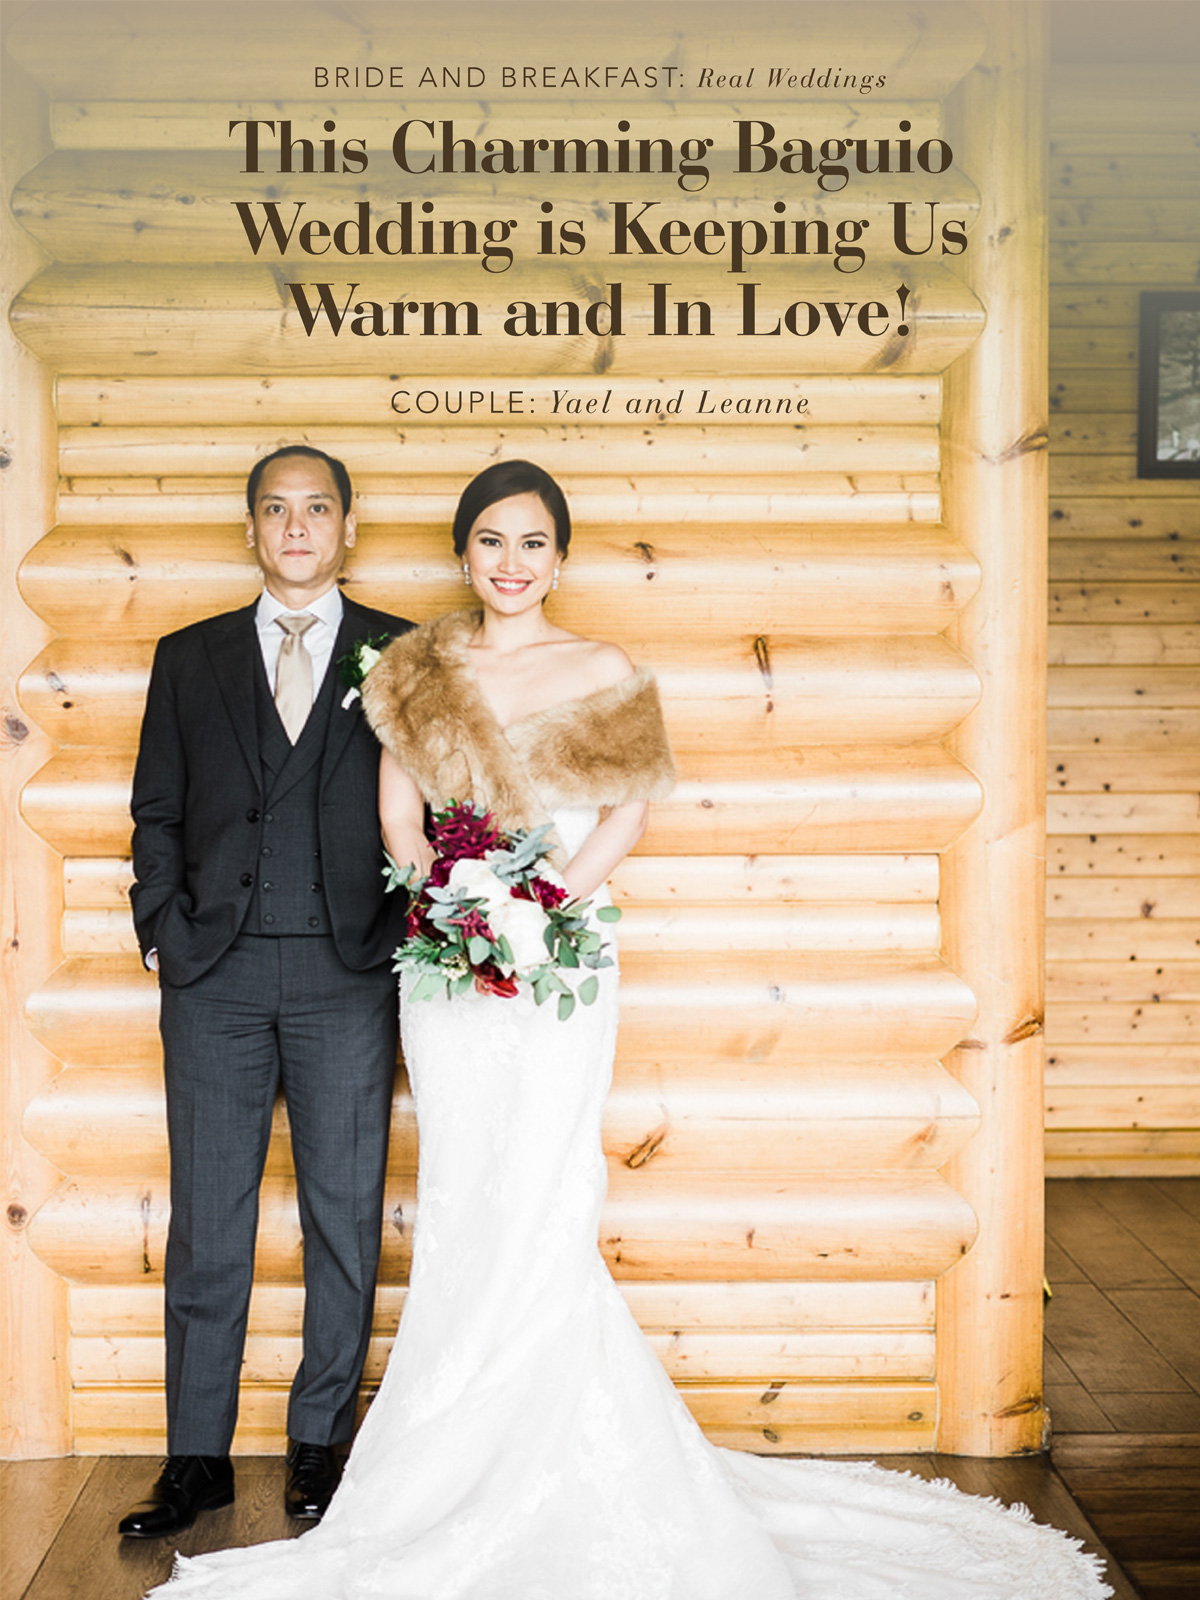 This Charming Baguio Wedding is Keeping Us Warm and In Love!